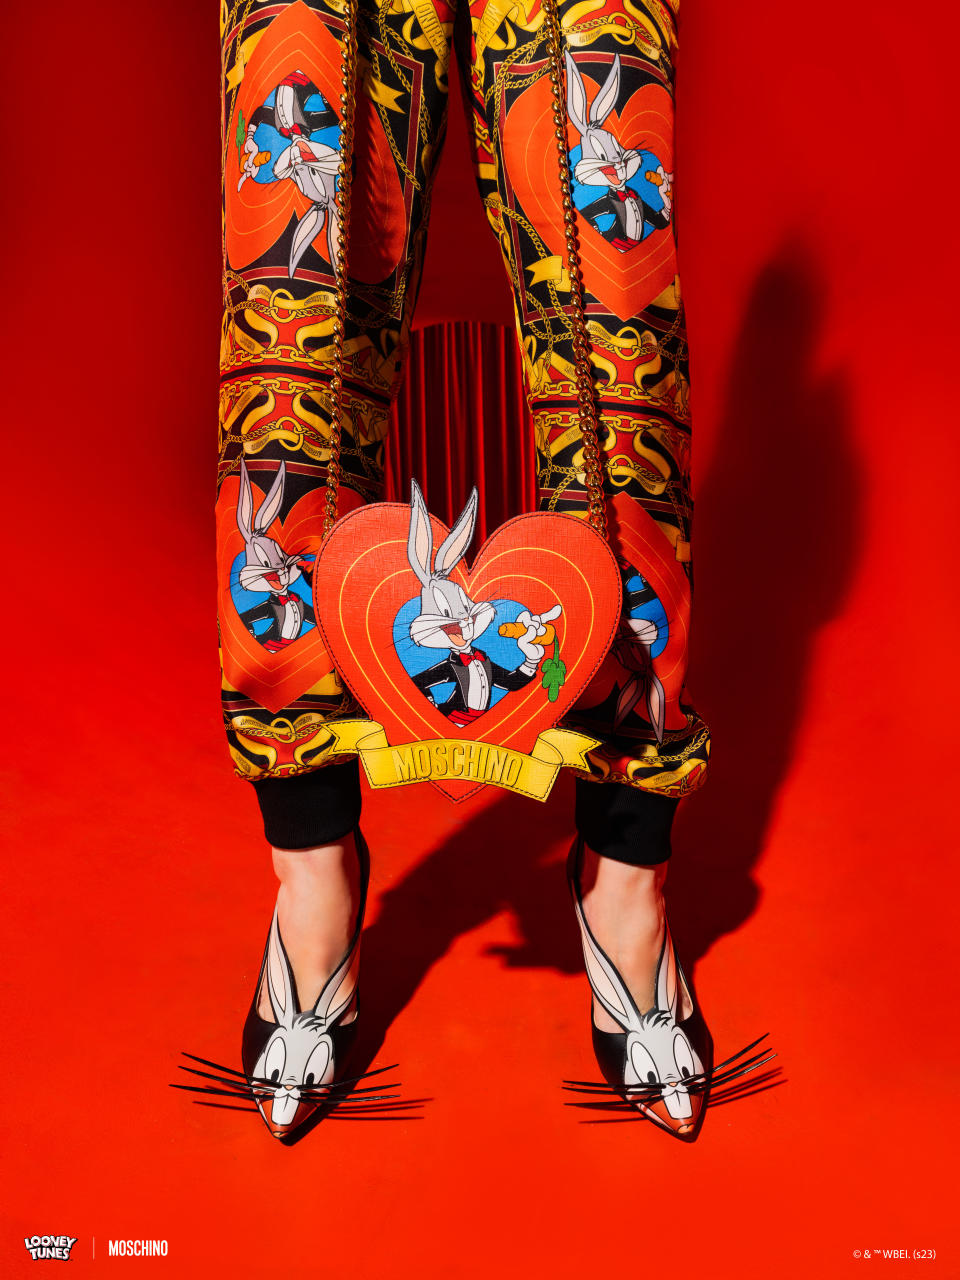 Moschino’s Year of the Rabbit campaign featuring Bugs Bunny.